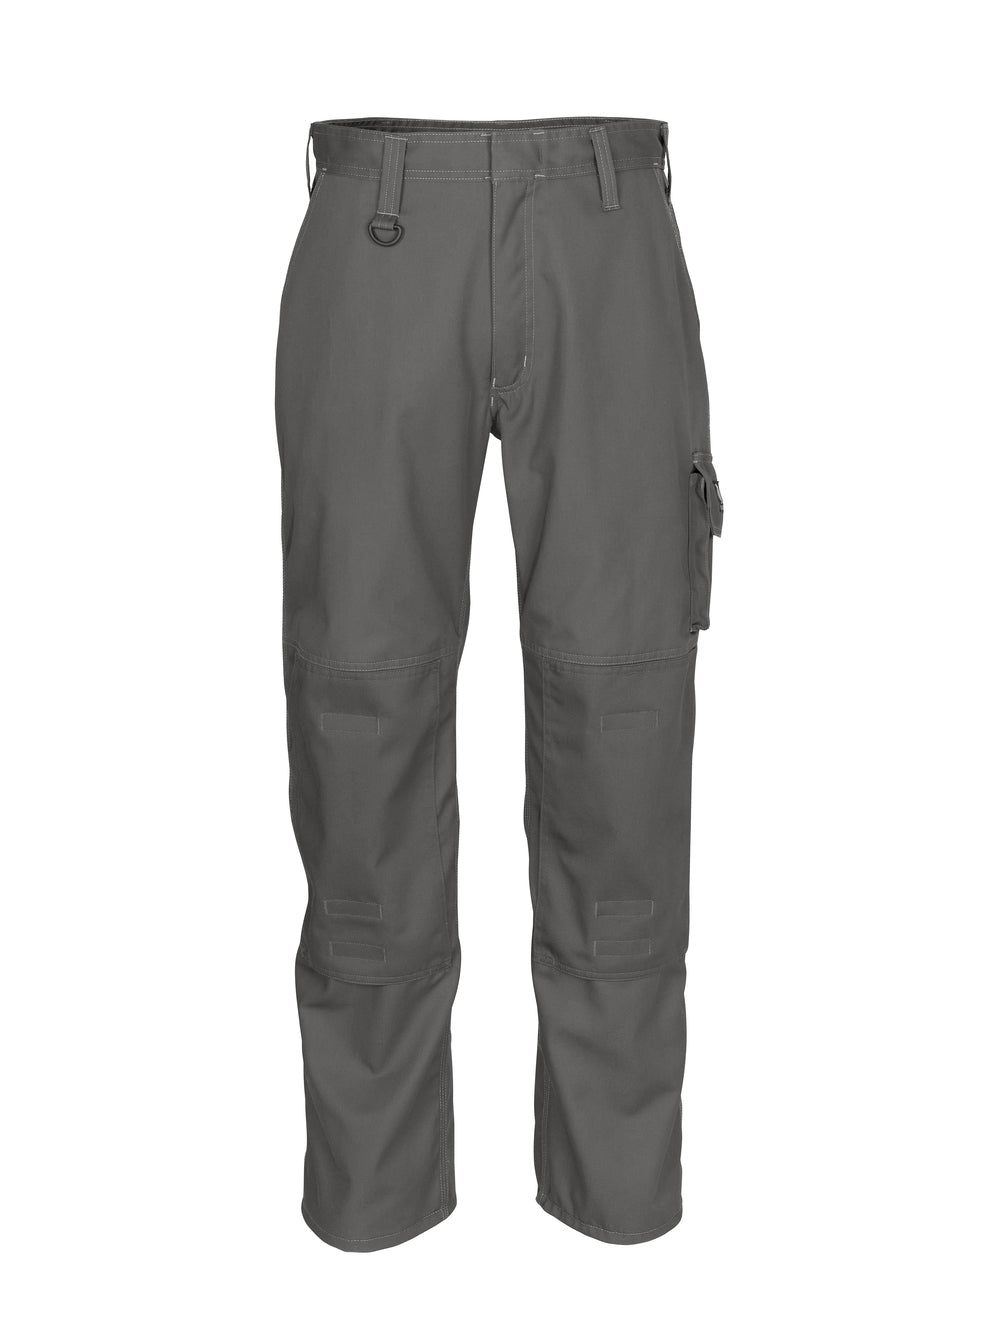 MASCOT®INDUSTRY Trousers with kneepad pockets Biloxi 12355 - DaltonSafety